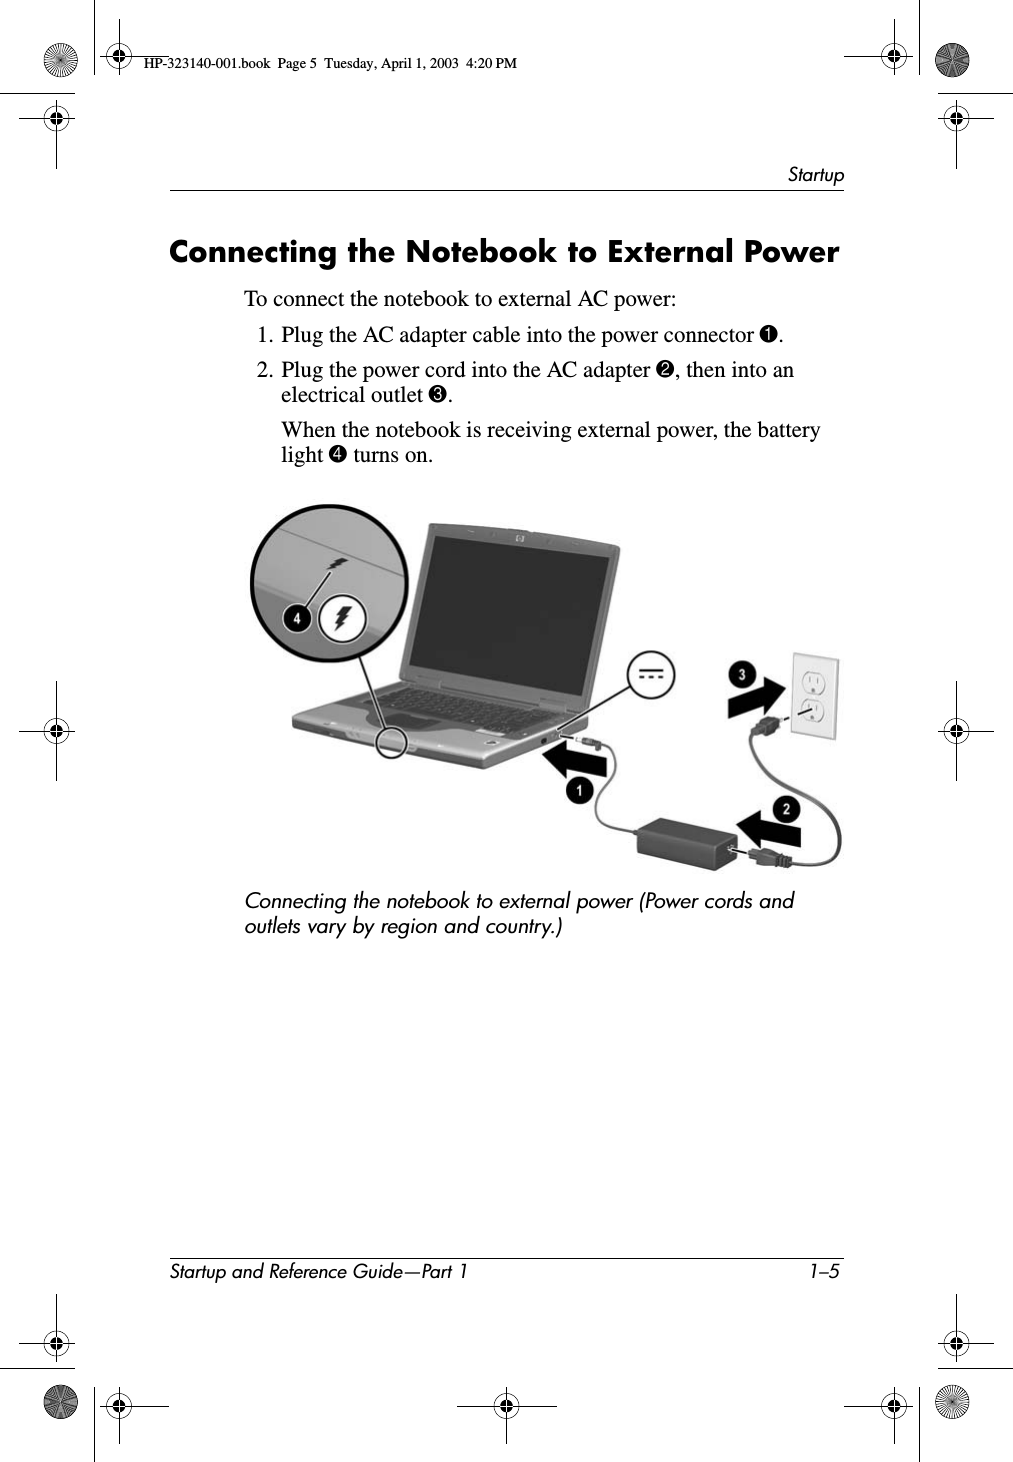 StartupStartup and Reference Guide—Part 1 1–5Connecting the Notebook to External PowerTo connect the notebook to external AC power:1. Plug the AC adapter cable into the power connector 1.2. Plug the power cord into the AC adapter 2, then into an electrical outlet 3.When the notebook is receiving external power, the battery light 4 turns on.Connecting the notebook to external power (Power cords and outlets vary by region and country.)HP-323140-001.book  Page 5  Tuesday, April 1, 2003  4:20 PM